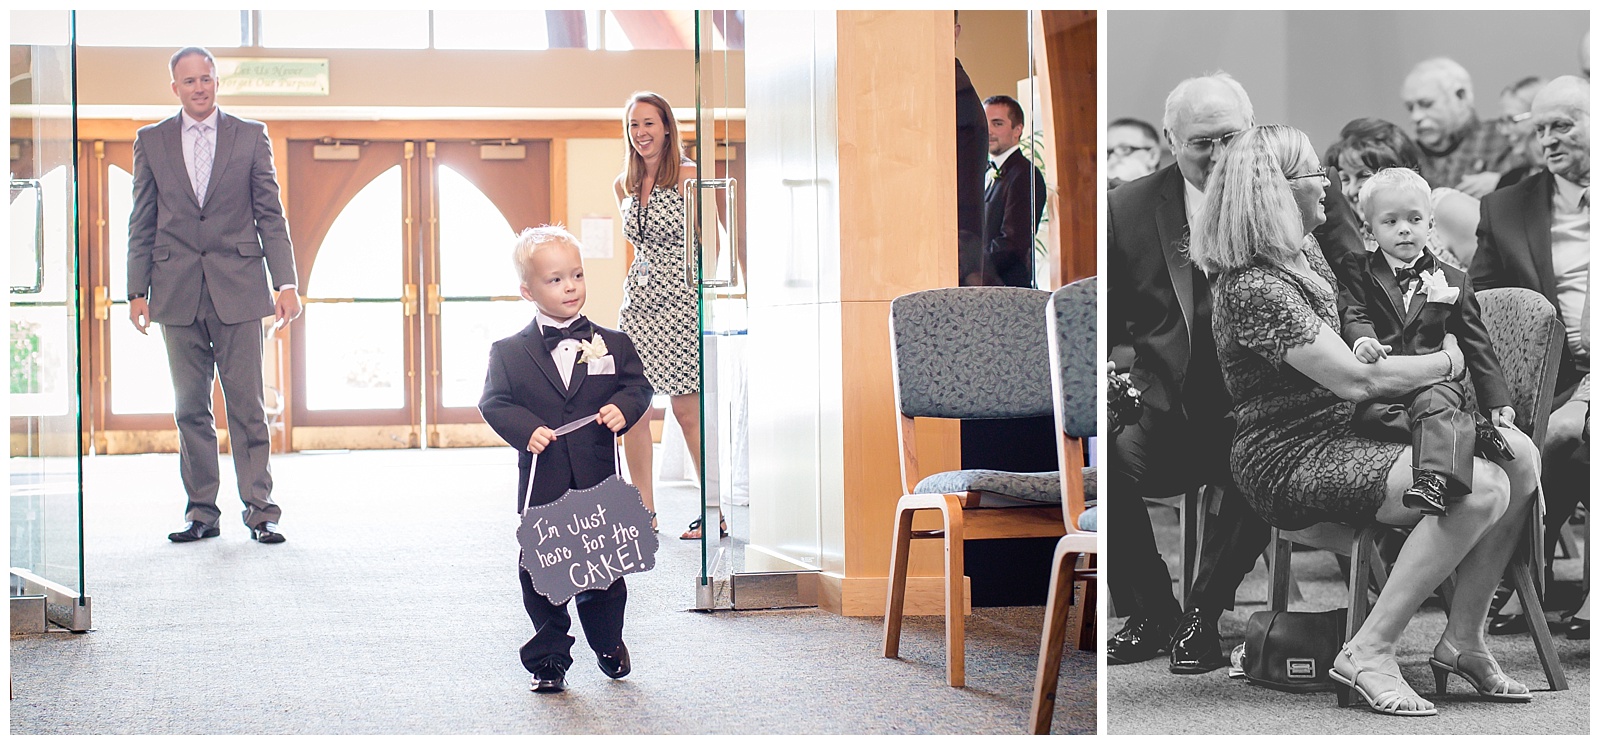 Wedding photography at United Methodist Church of the Resurrection in Leawood, Kansas.